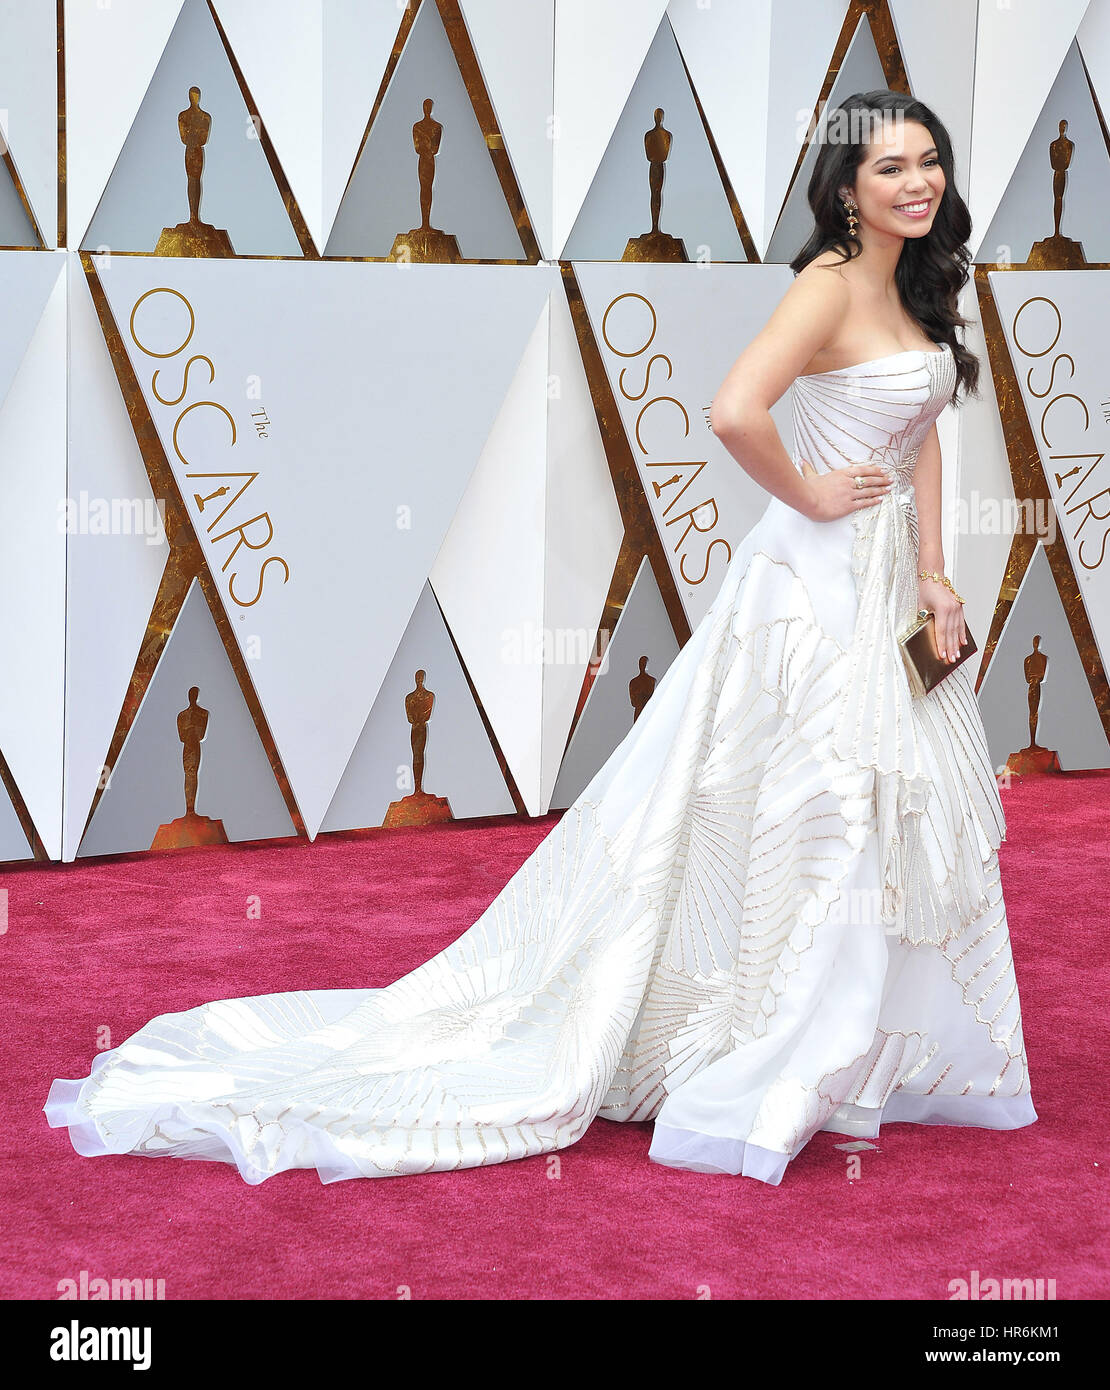 HOLLYWOOD - FEBRUARY 26: Auli'i Cravalho attends the 89th Annual Academy Awards at the Dolby Theatre on February 26, 2017 in Hollywood, California. Credit: mpi99/MediaPunch Stock Photo